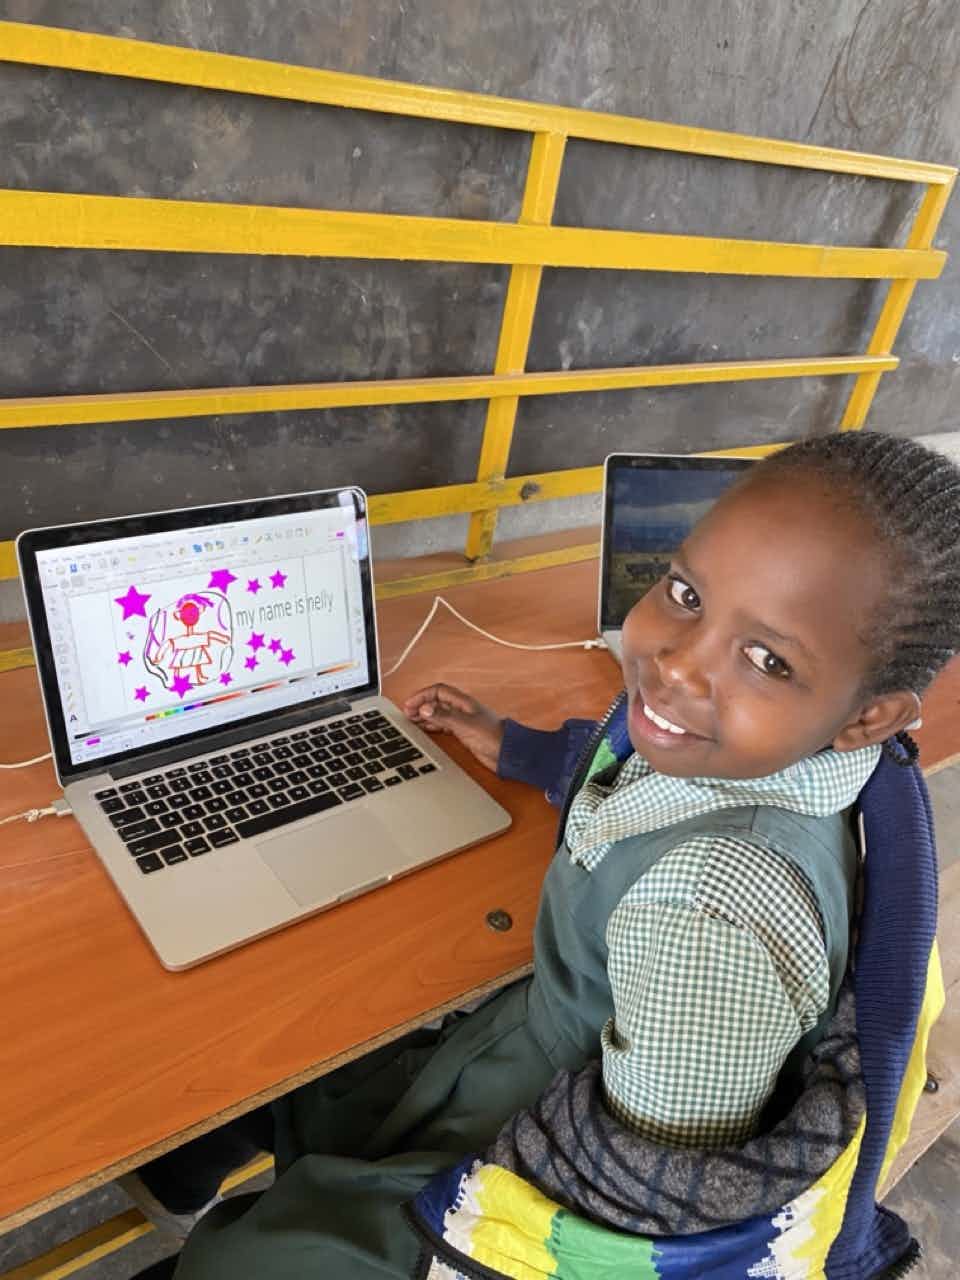 Software Inkscape Grace Wangui A Student At Zawadi Yetu Mogotio Showing A Screen With Her Inkcape Designs